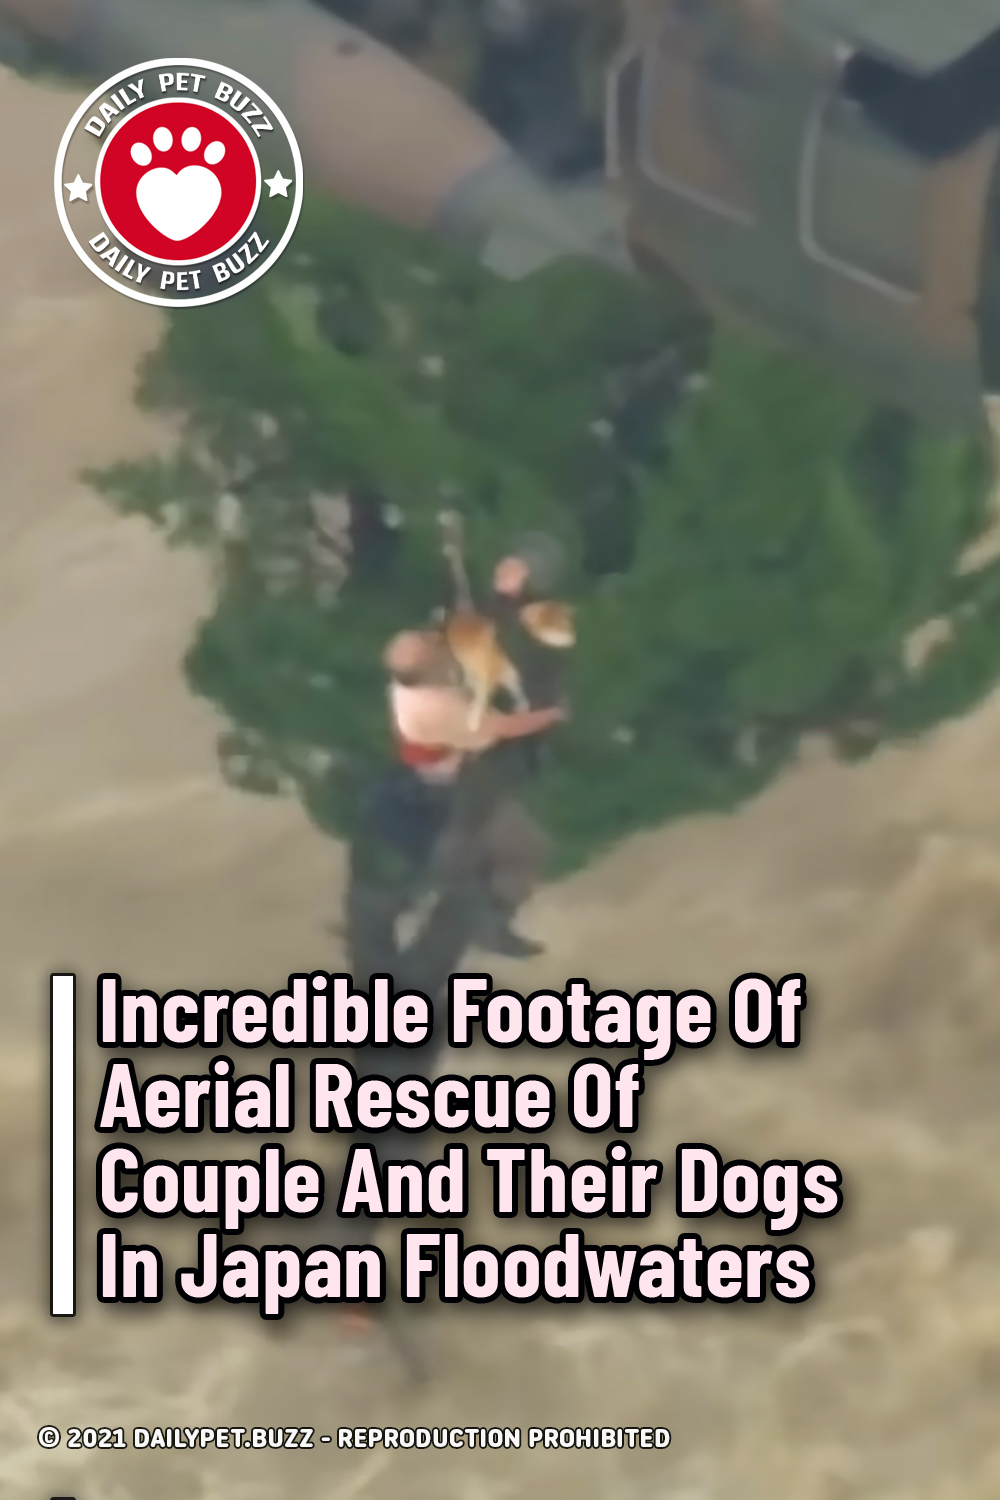 Incredible Footage Of Aerial Rescue Of Couple And Their Dogs In Japan Floodwaters